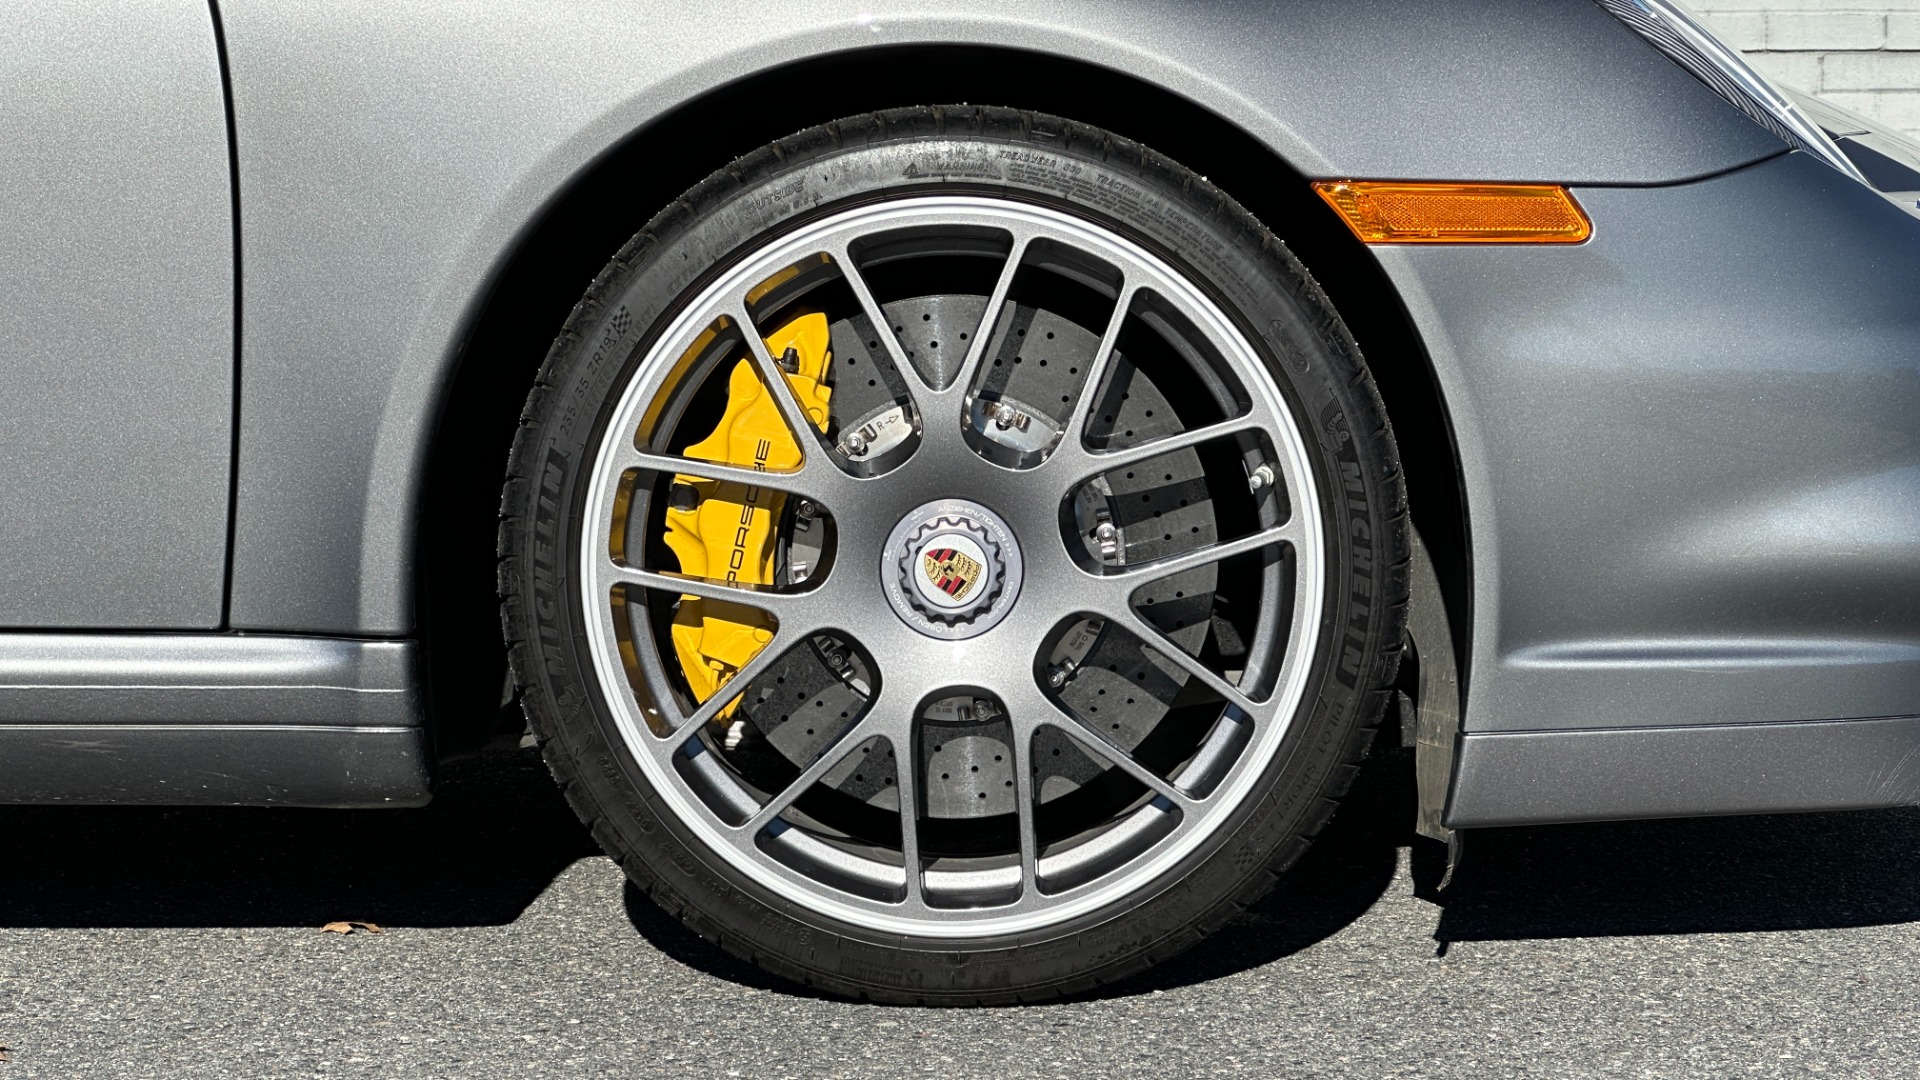 Used 2012 Porsche 911 TURBO S / CENTER LOCK WHEELS / FULL LEATHER INTERIOR / YELLOW CALIPERS / PA for sale Sold at Formula Imports in Charlotte NC 28227 45